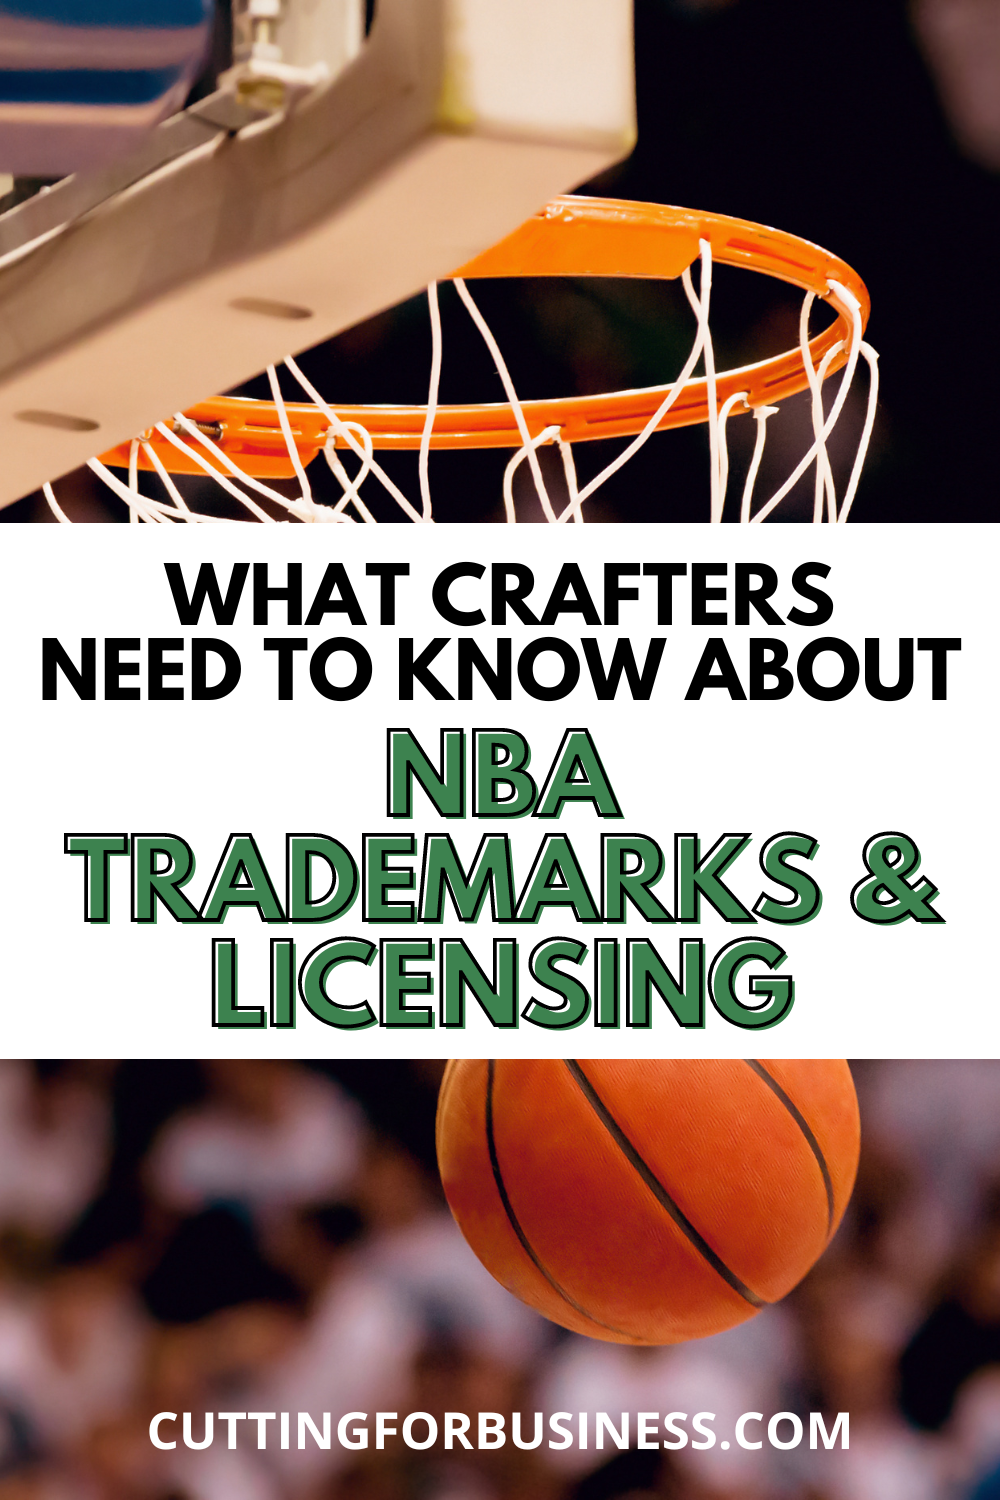 Trademarks: What Crafters Need to Know About NBA Trademarks and Licensing - cuttingforbusiness.com